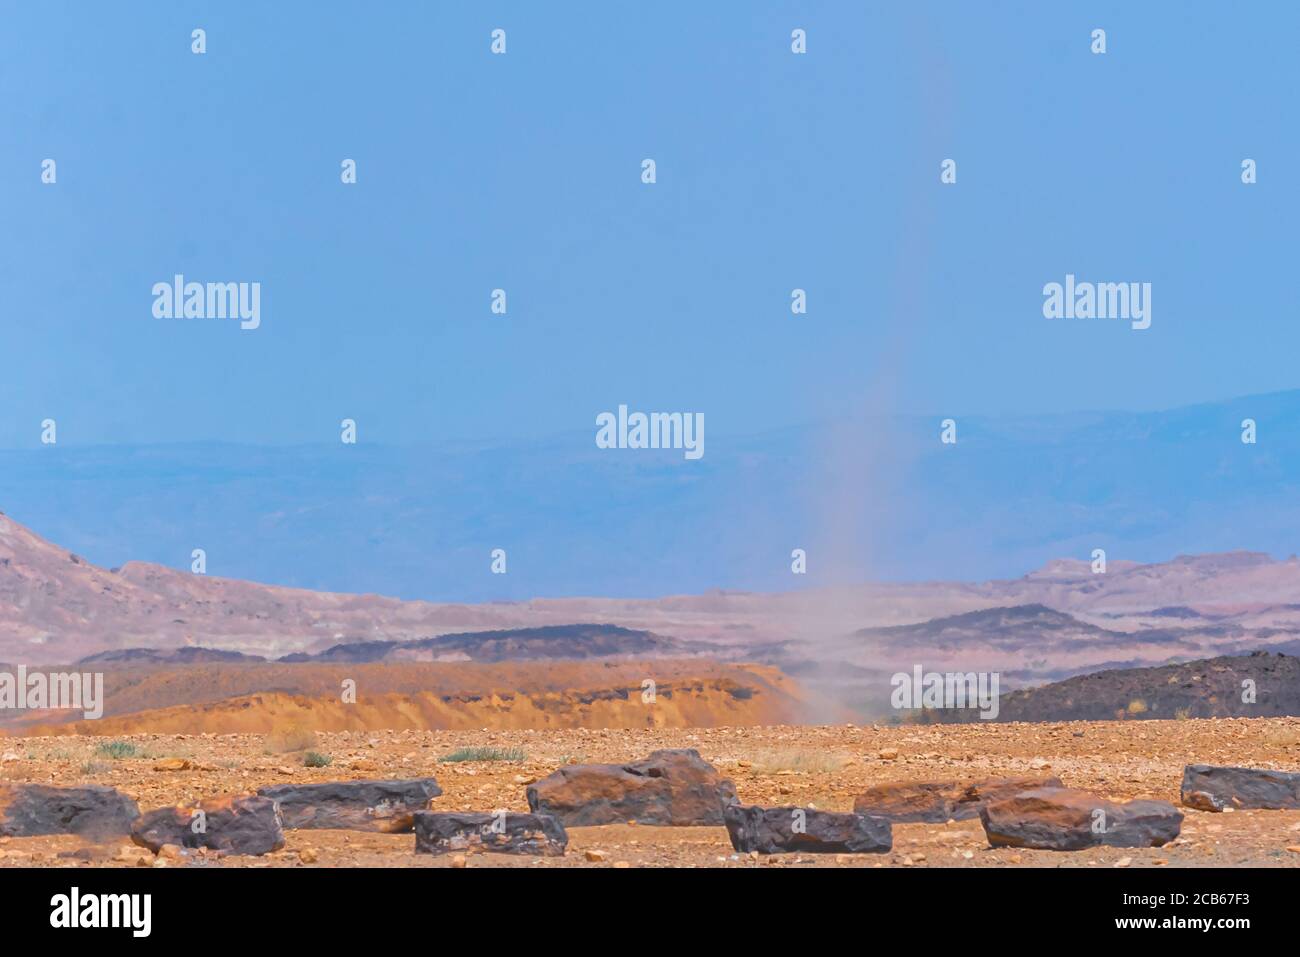 Whirlwind forms a dust pillar in the desert. Photographed in the Negev Desert, Israel Stock Photo